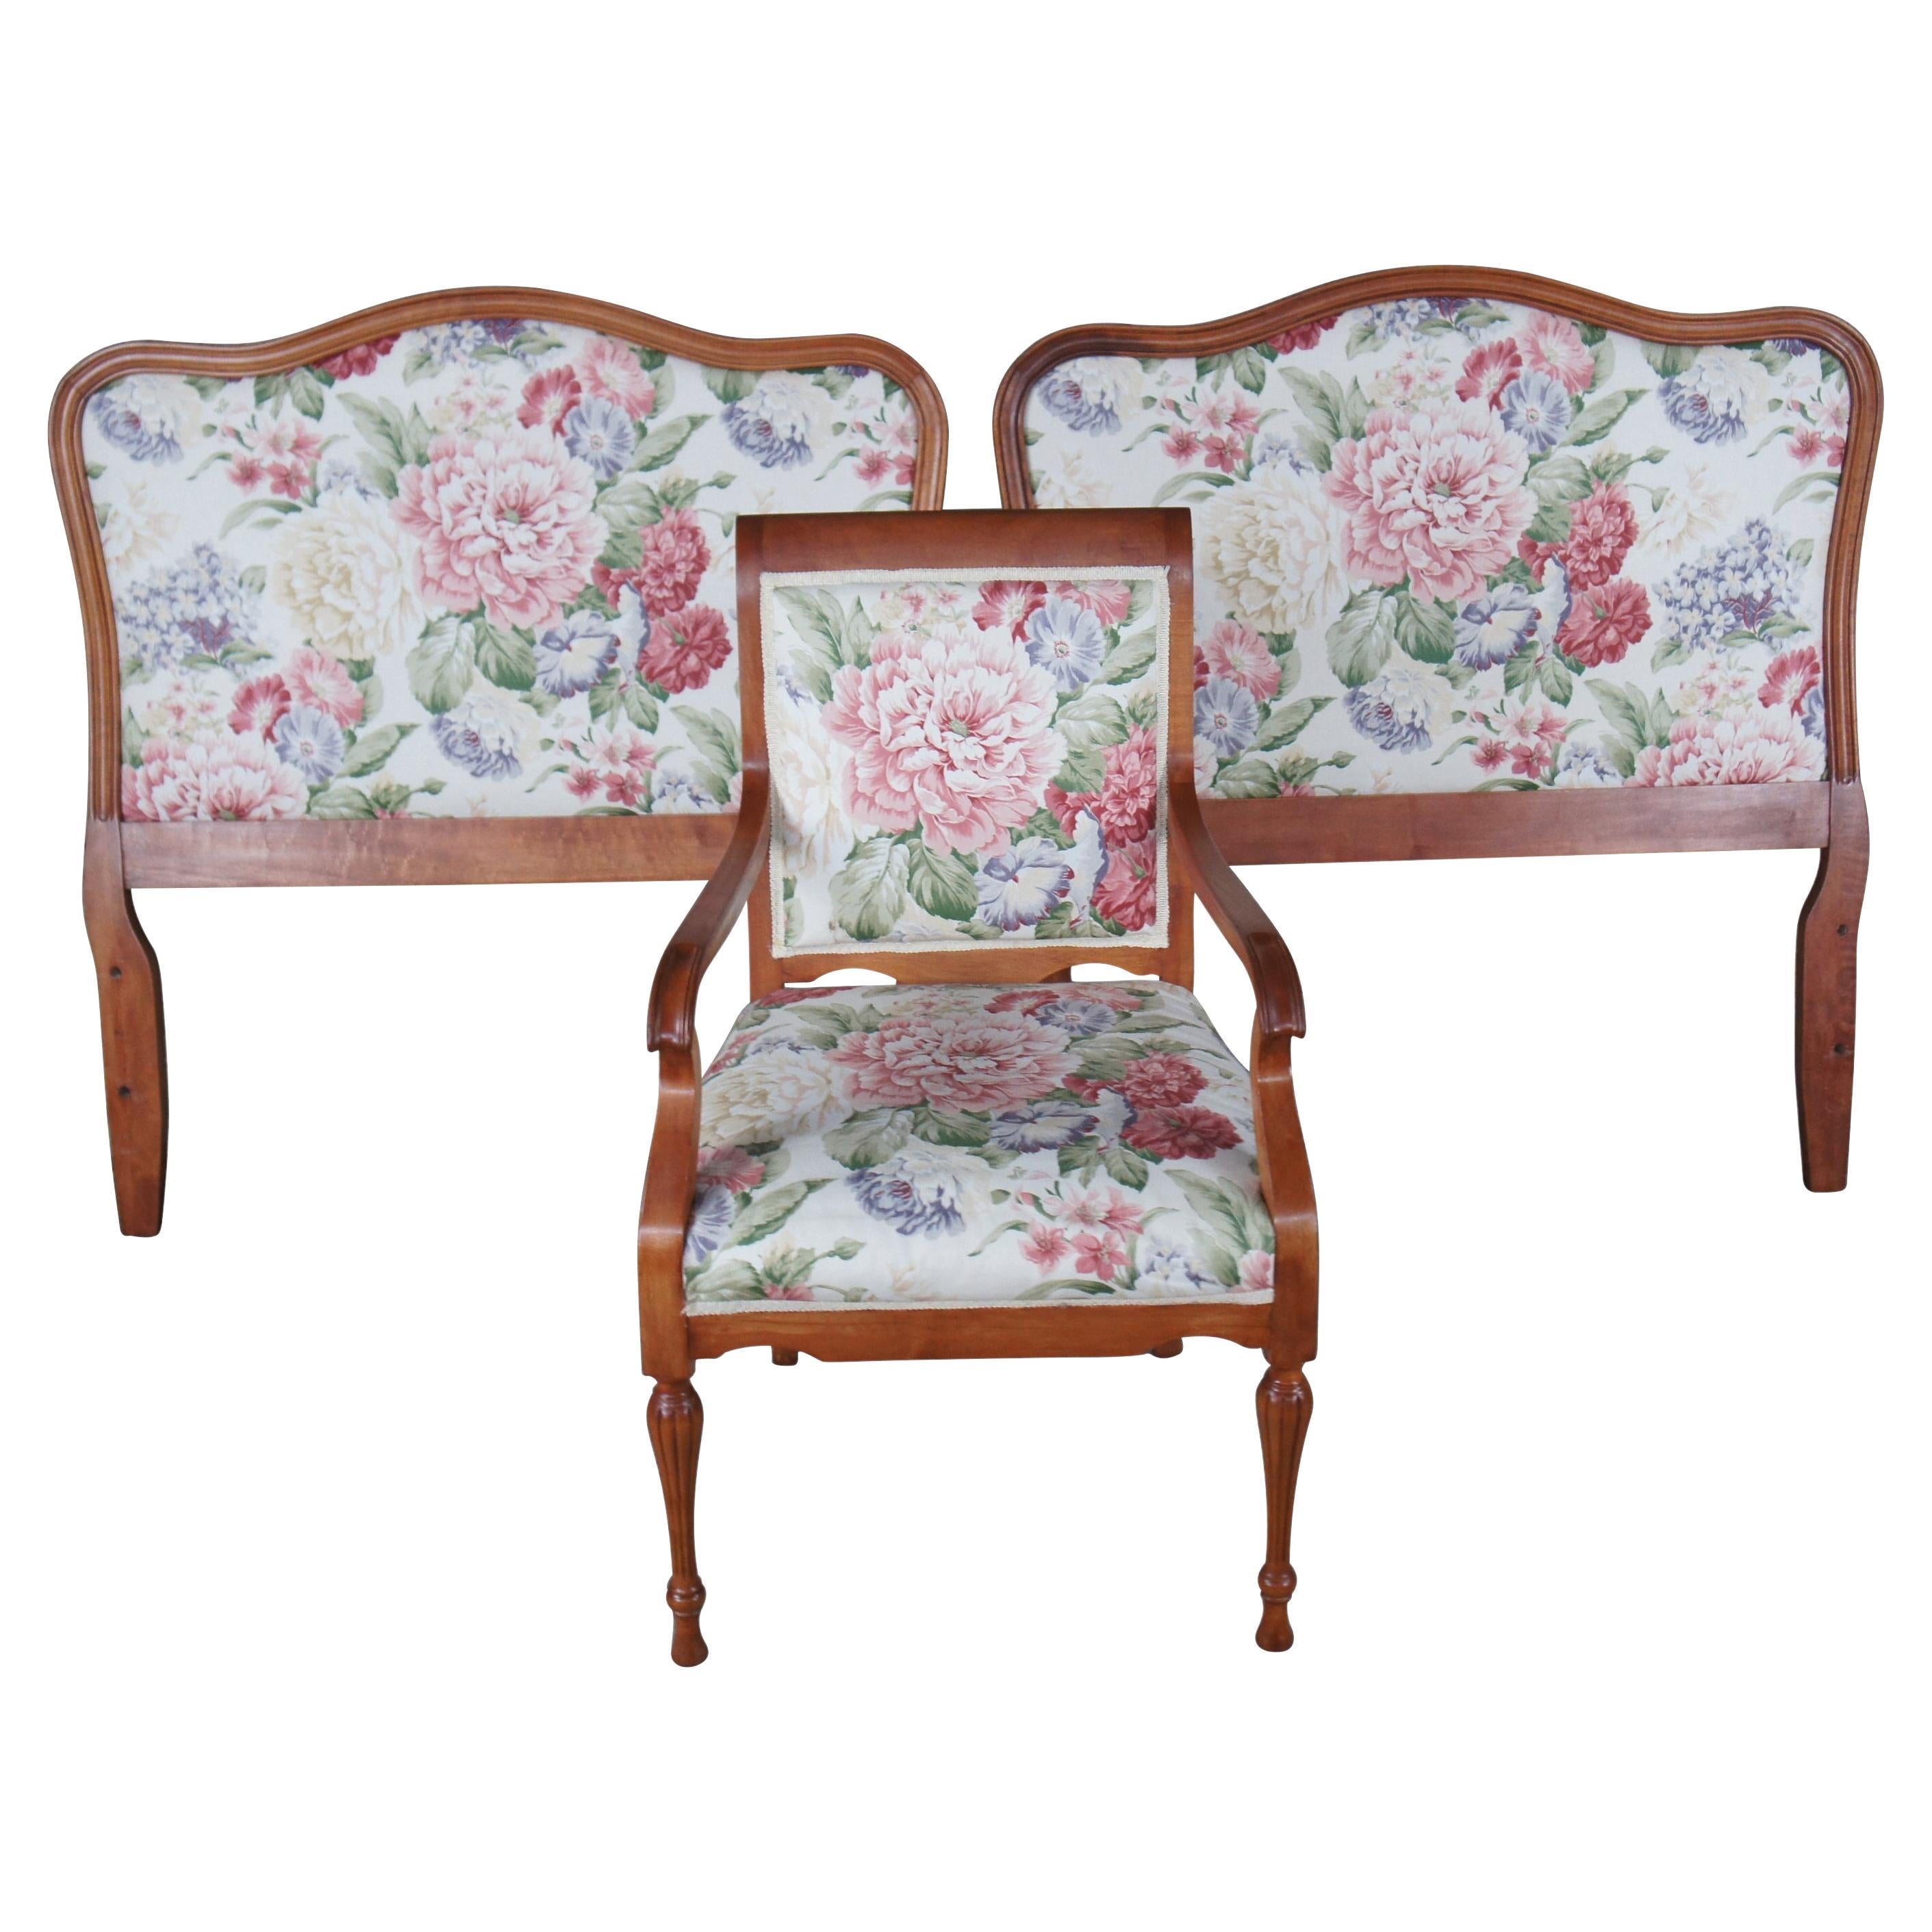 Mid Century French Provincial Mahogany Floral Upholstered Twin Beds & Arm Chair  For Sale